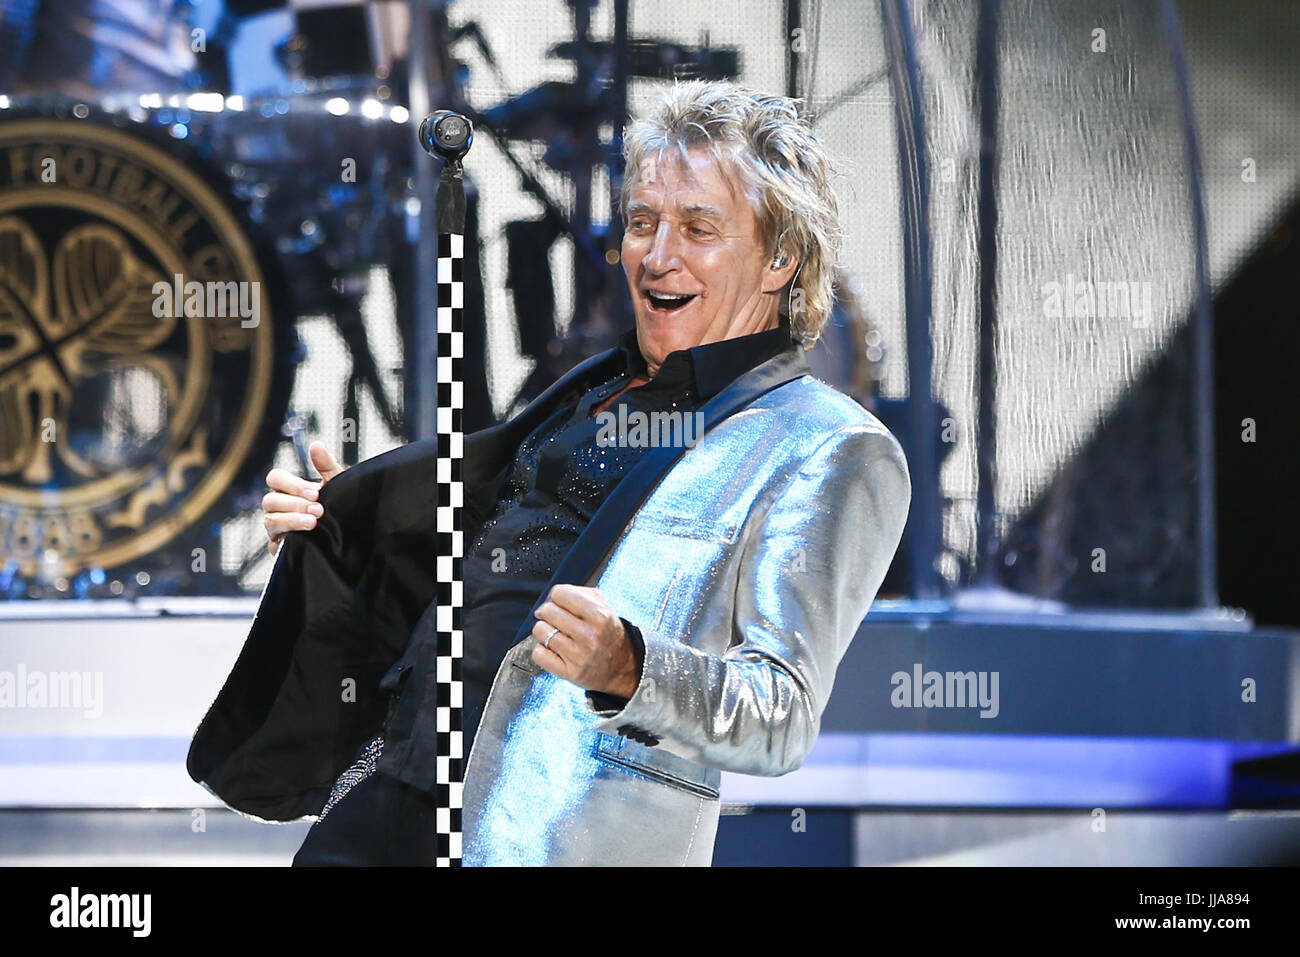 New York, USA . 18th July, 2017. Rod Stewart performs in concert at Northwell Health at Jones Beach Theater on July 18, 2017 in Wantagh, New York. Credit: AKPhoto/Alamy Live News Stock Photo